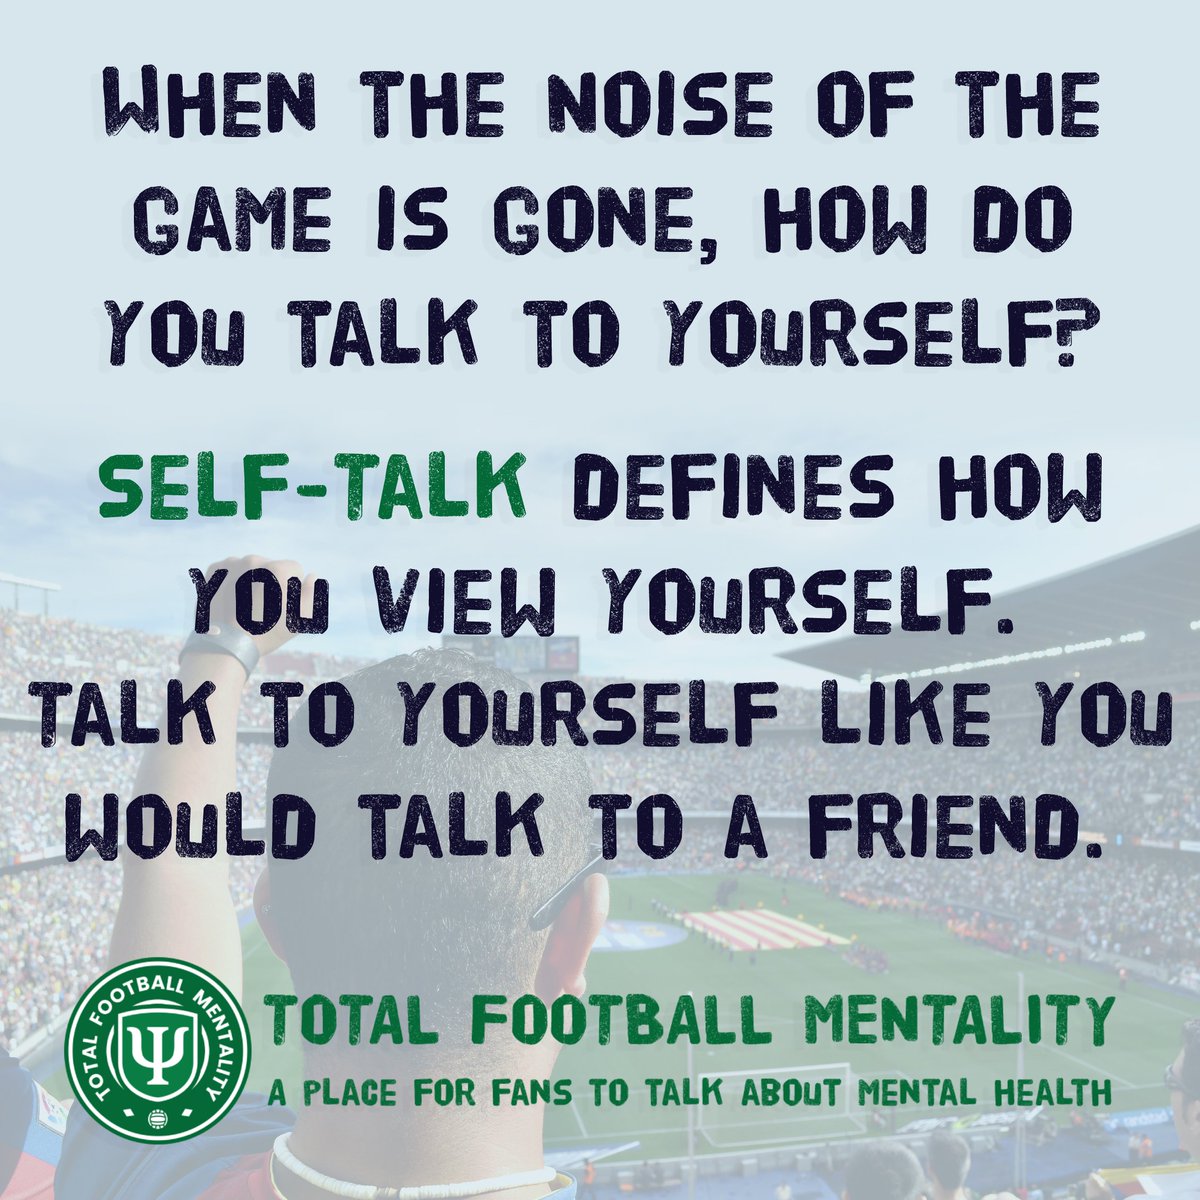 How you talk to yourself can destroy your self-esteem and affect your mental health. Are you aware of all the negative thoughts you have daily? Be kind to yourself.

#MentalHealth ⚽️ #SelfTalk ⚽️ #BeKindToYourself